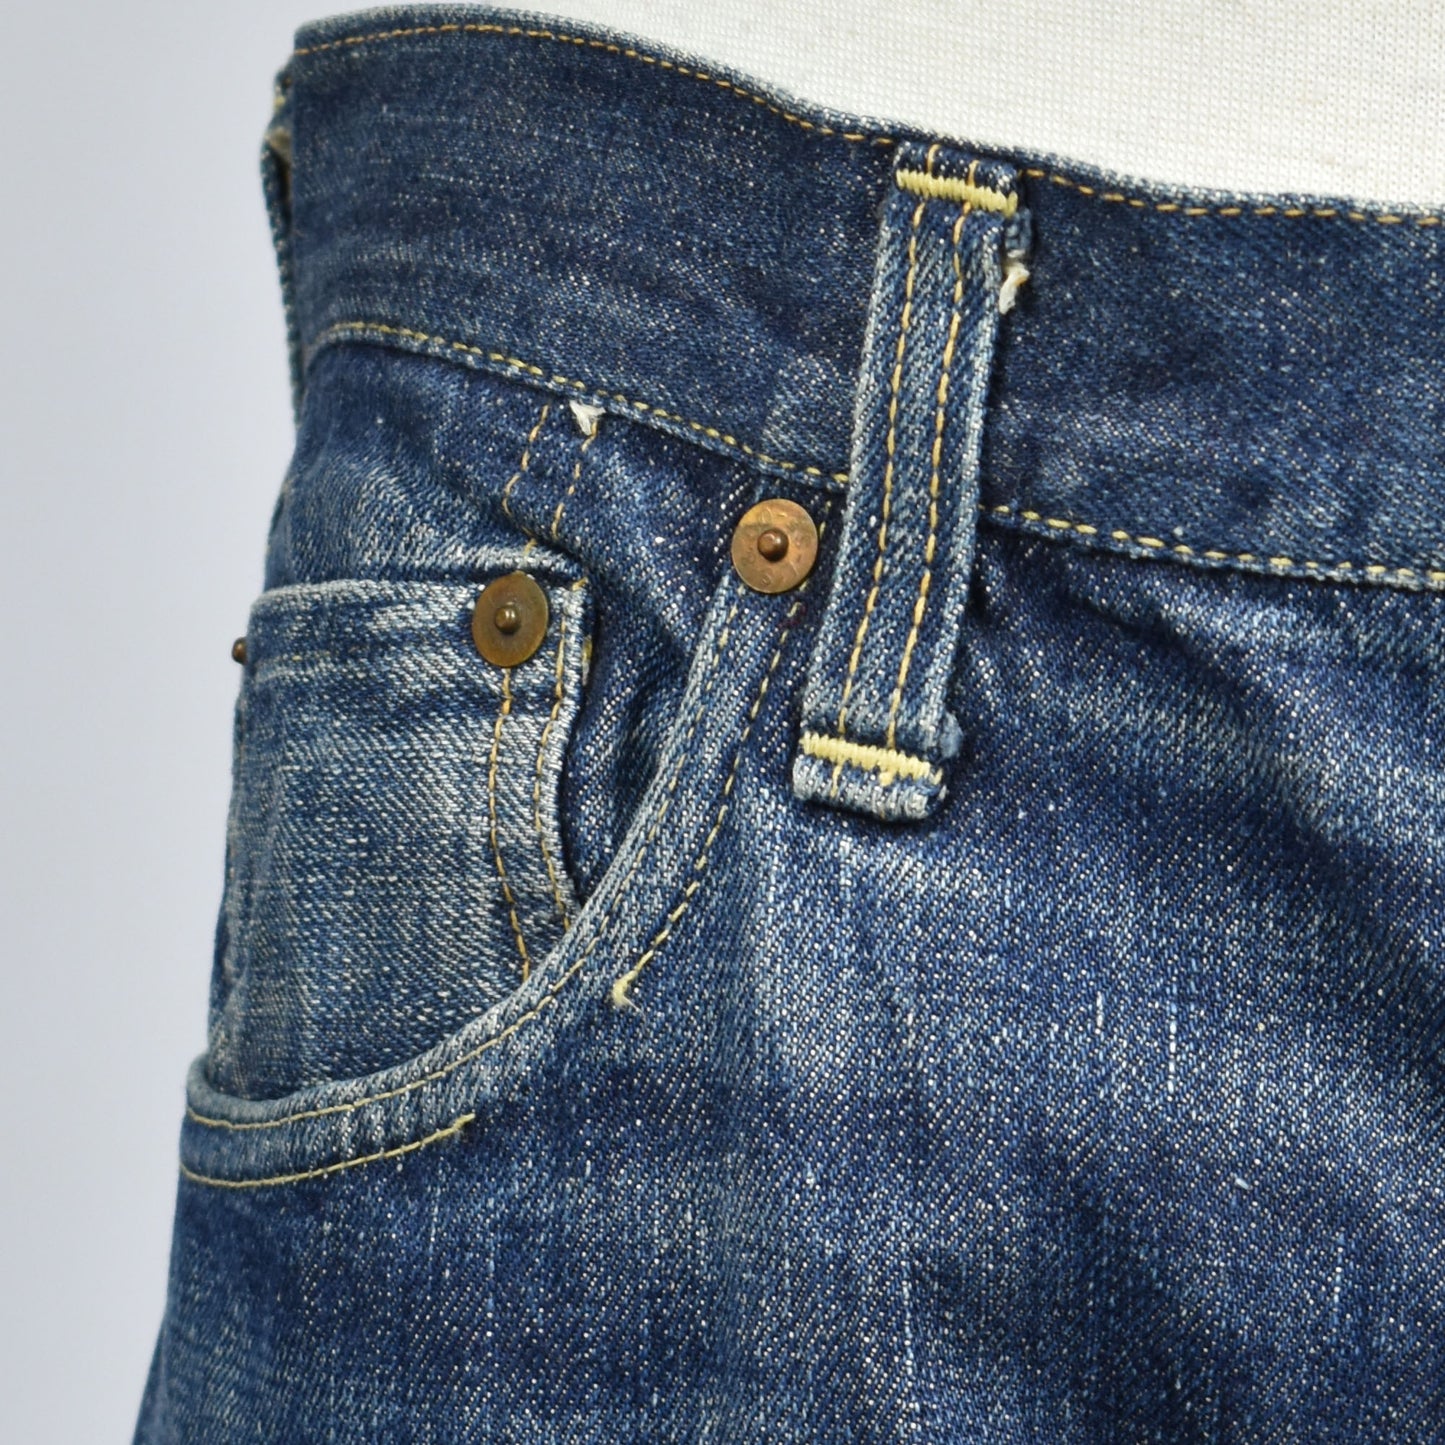 Rare 40s / 50s Levi's 501s Big E Jeans - The Holy Grail - Jerky Leather Patch - Hidden Rivets - Red Line Selvedge